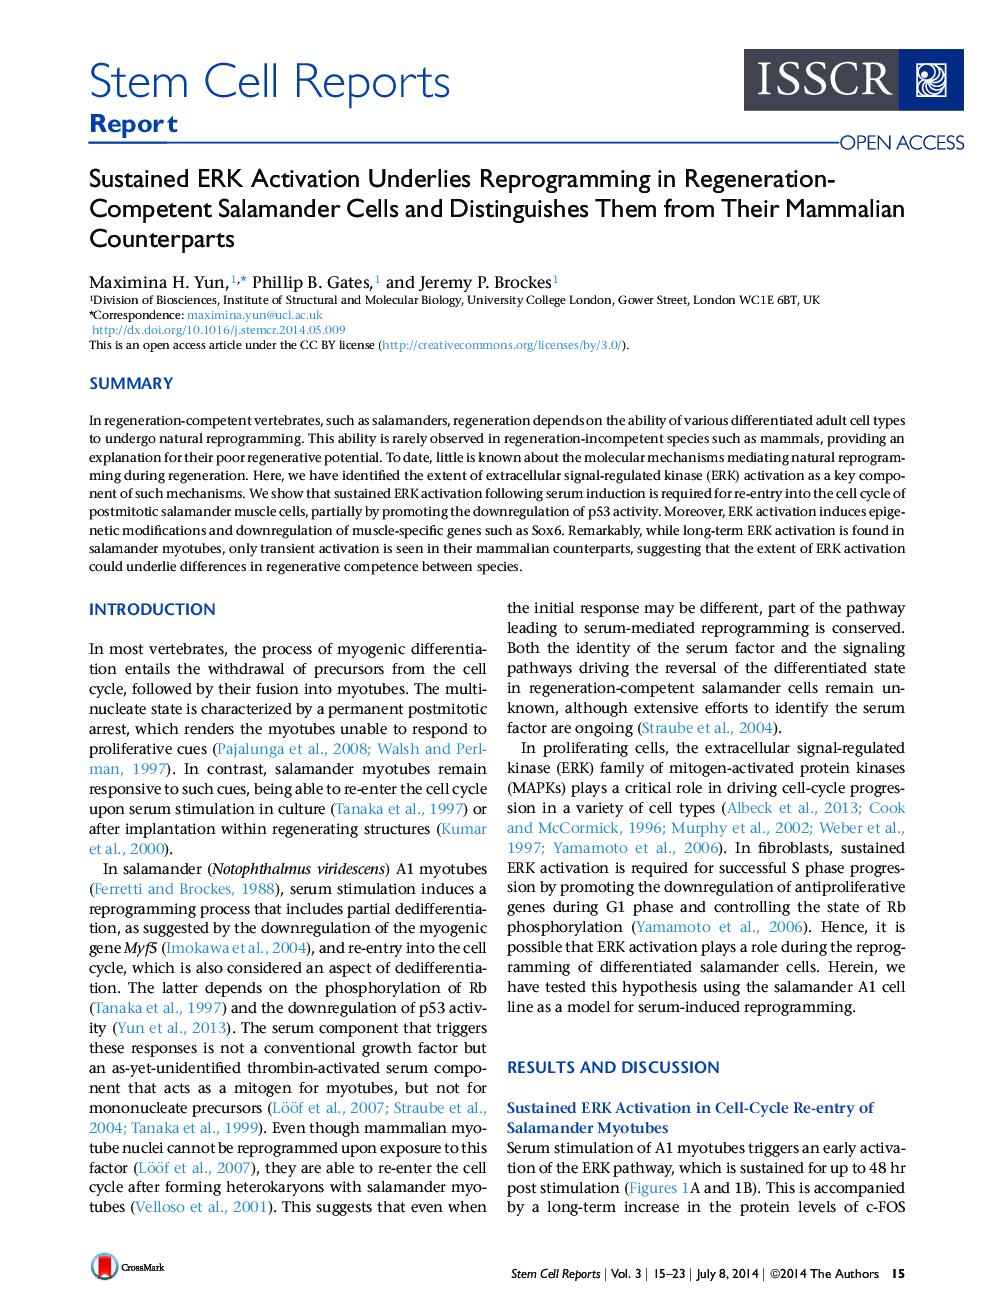 Sustained ERK Activation Underlies Reprogramming in Regeneration-Competent Salamander Cells and Distinguishes Them from Their Mammalian Counterparts 